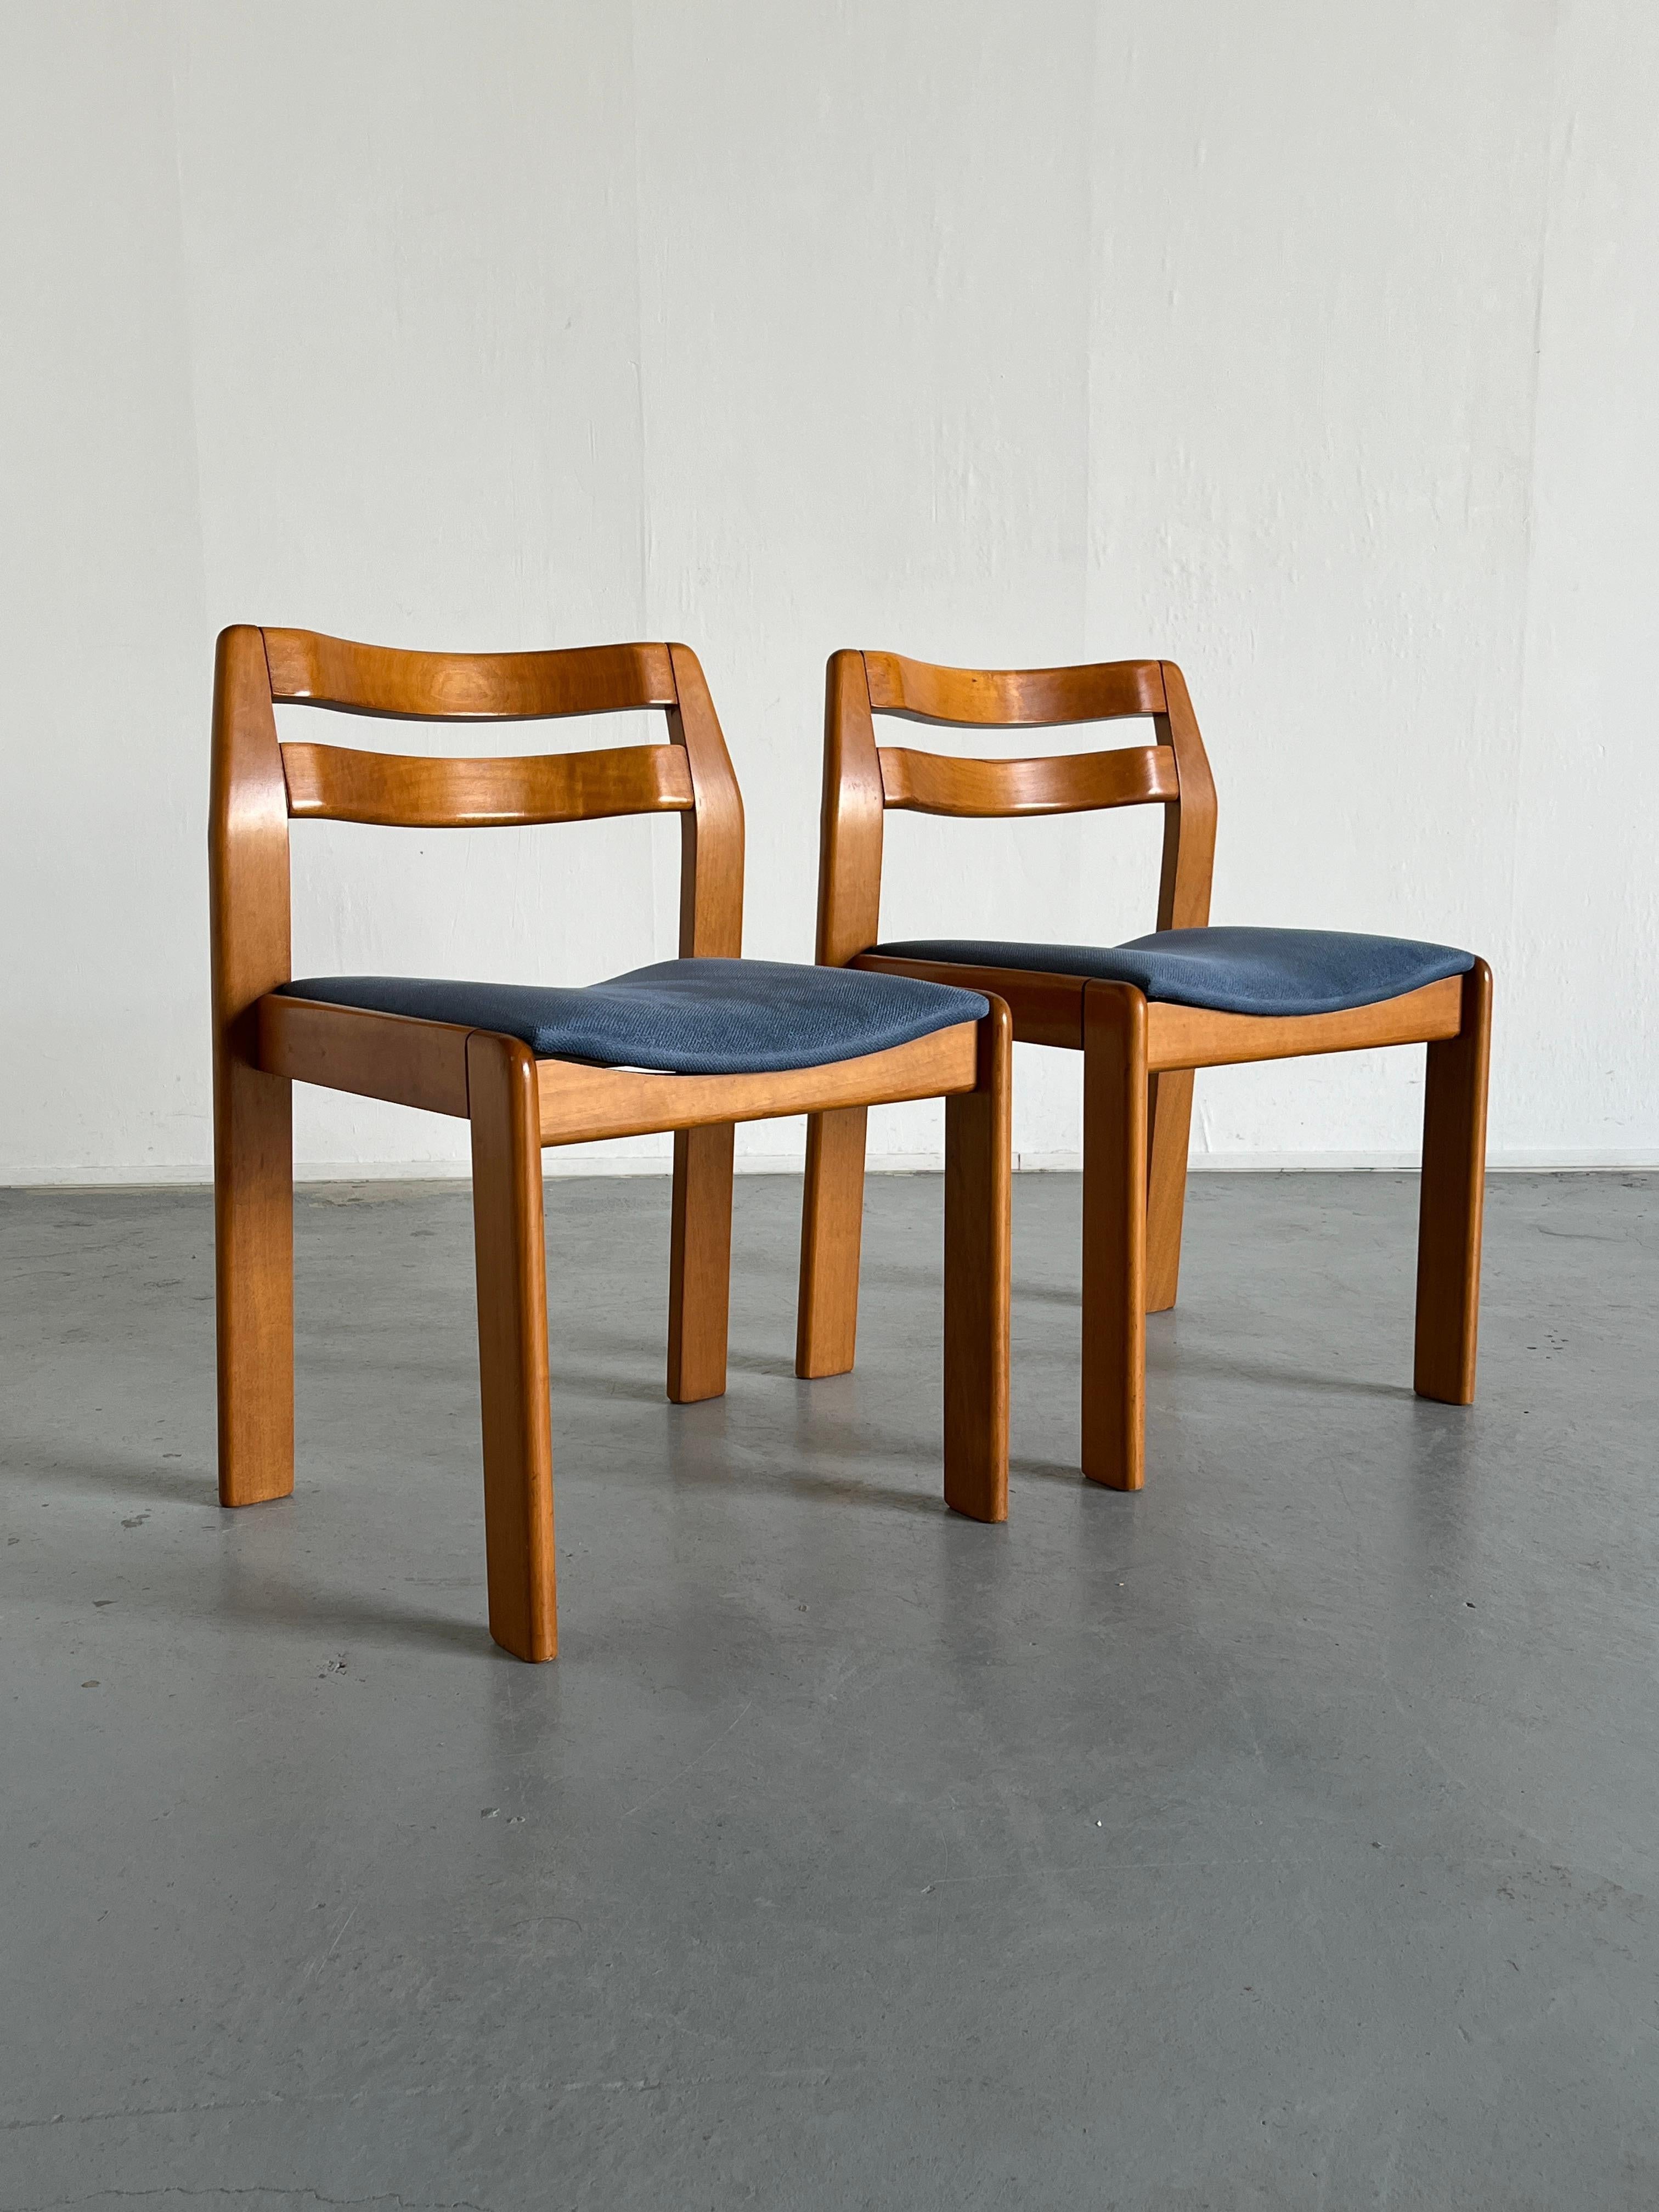 Pair of Elegant Italian Mid-Century Modern Lacquered Wood Dining Chairs, 1960s In Good Condition For Sale In Zagreb, HR